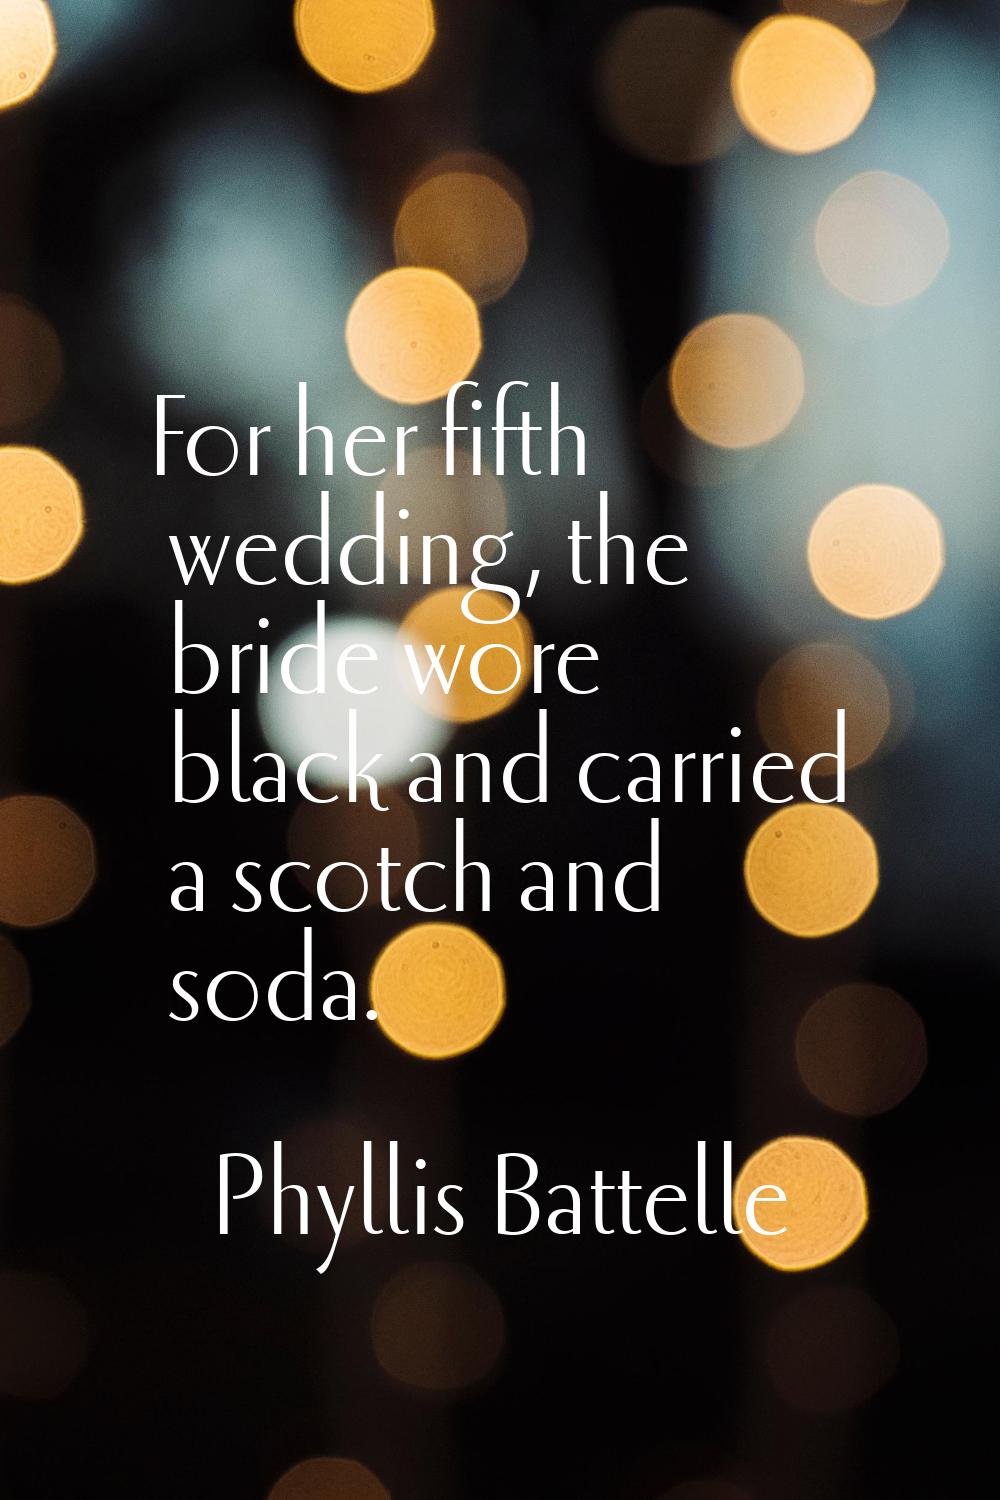 For her fifth wedding, the bride wore black and carried a scotch and soda.